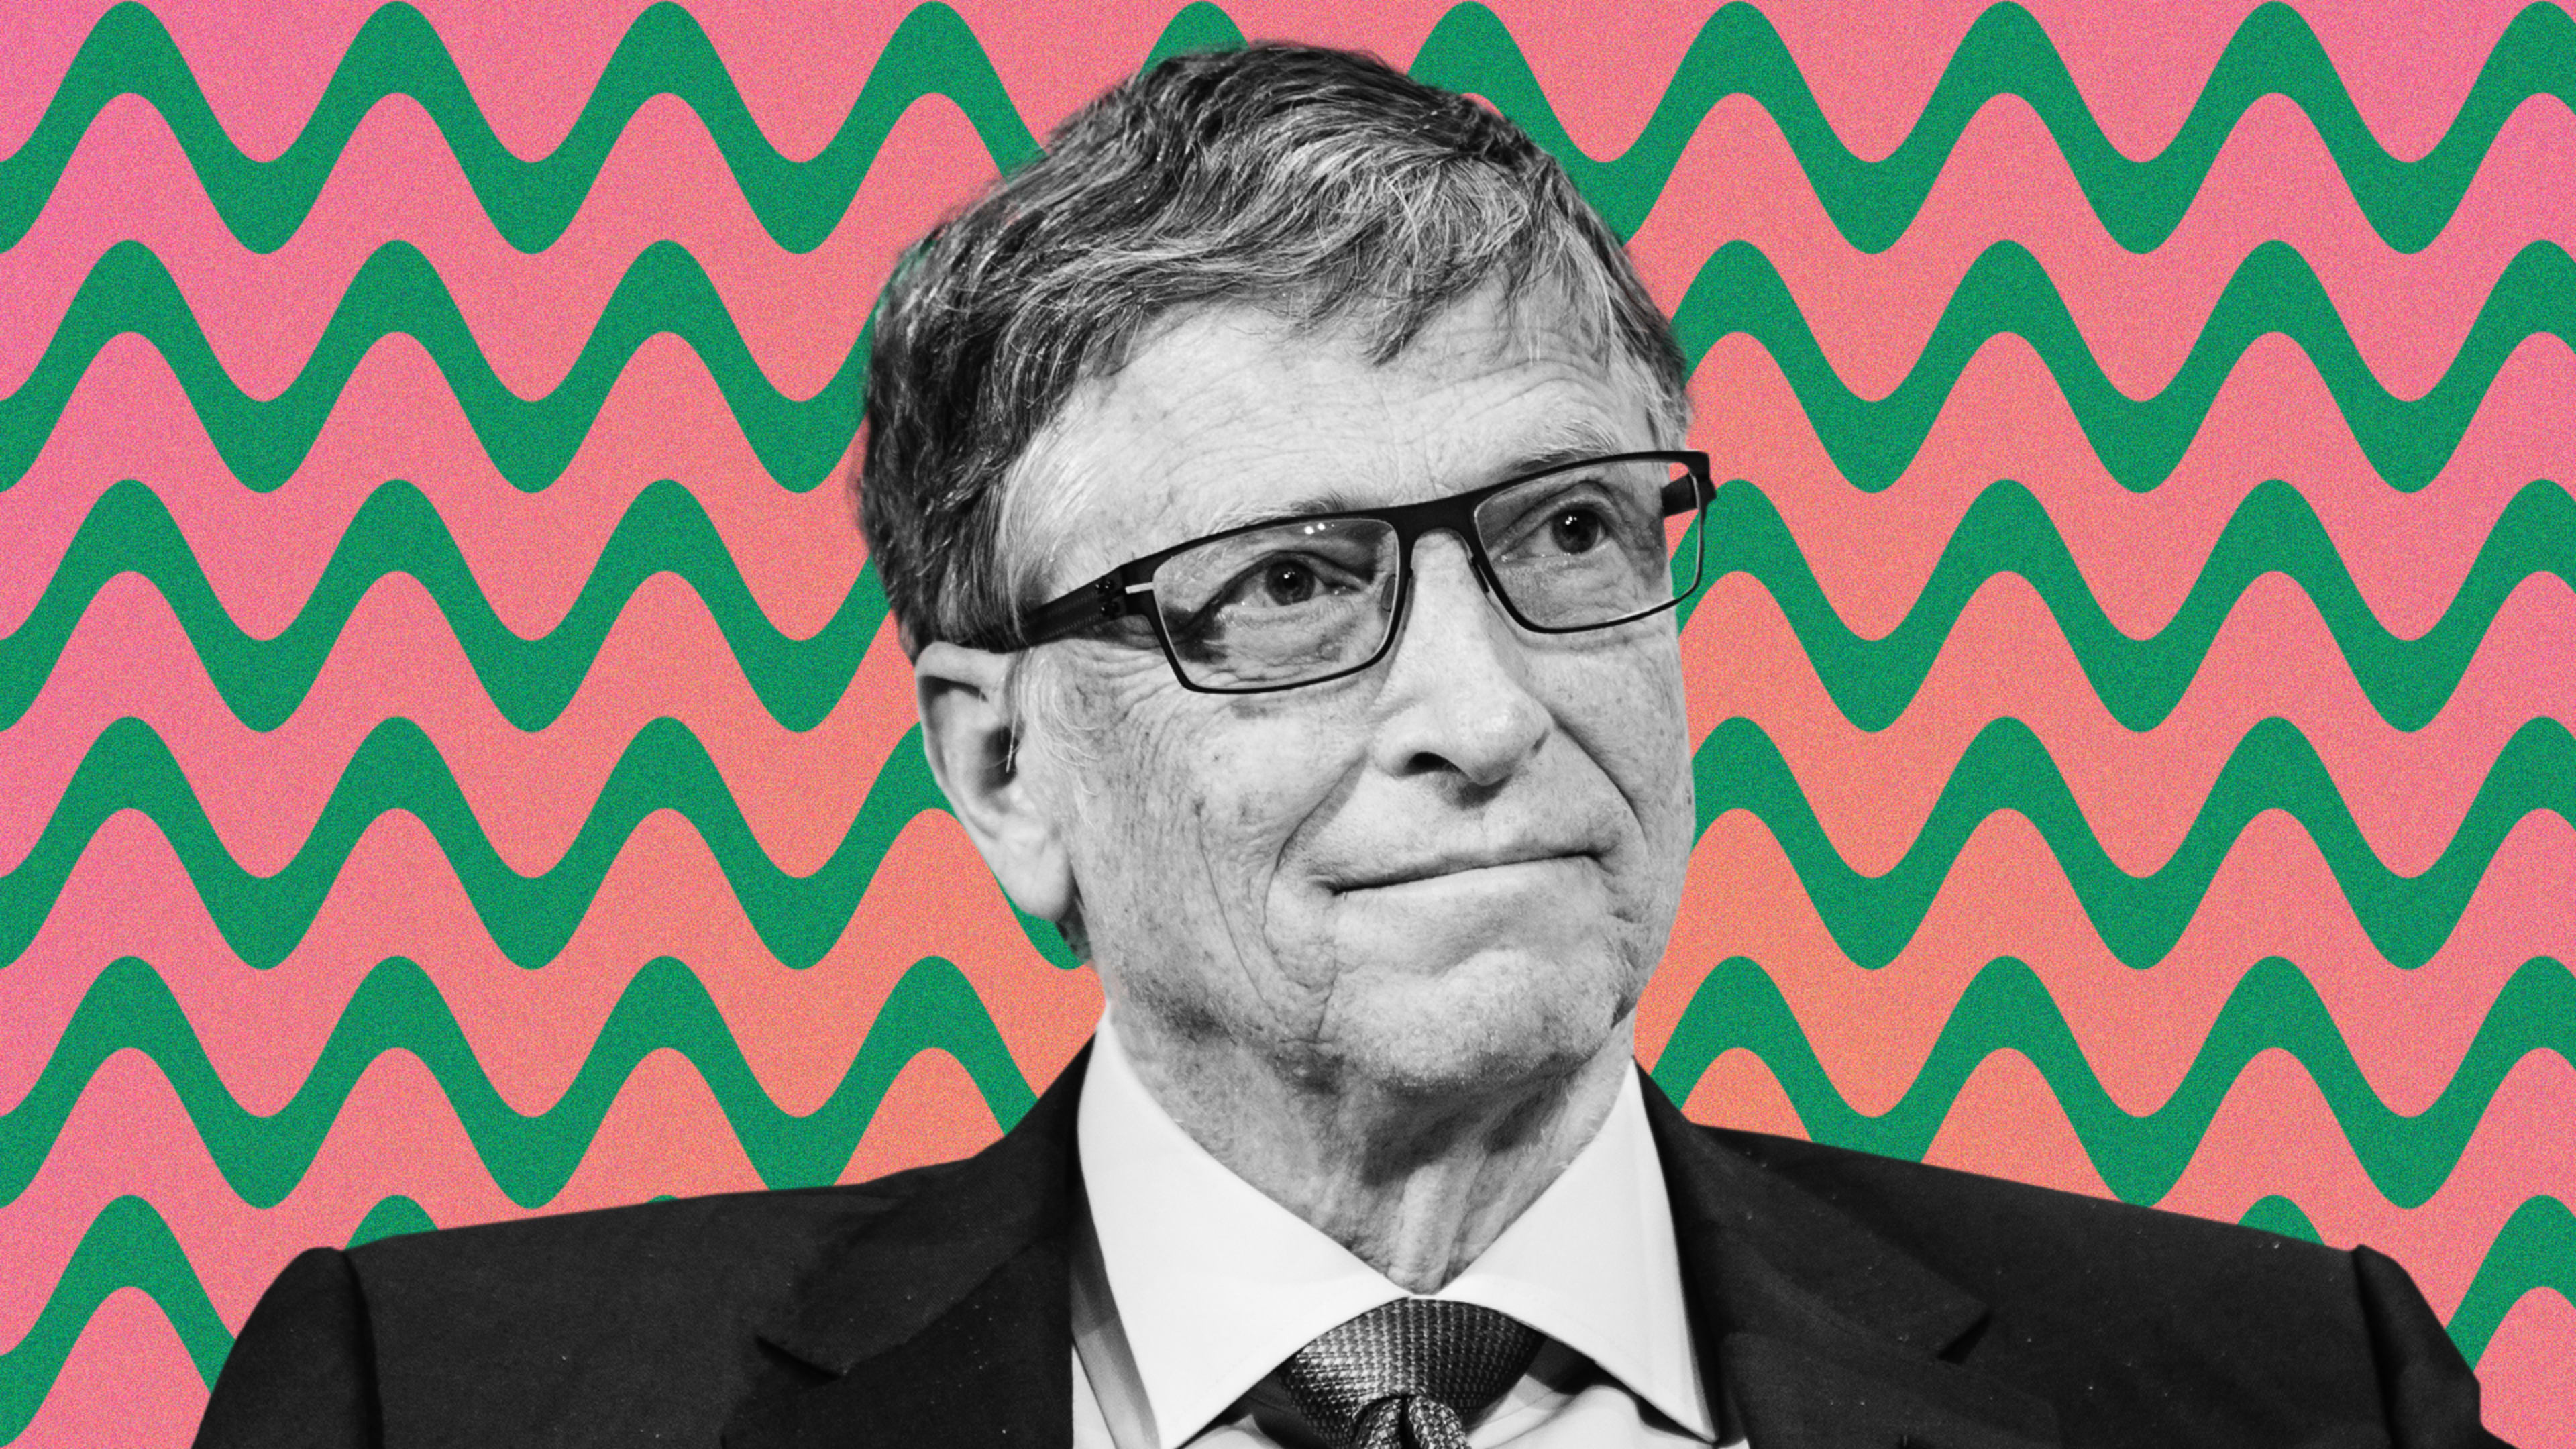 Here’s what Bill Gates is reading and bingeing during the COVID-19 pandemic